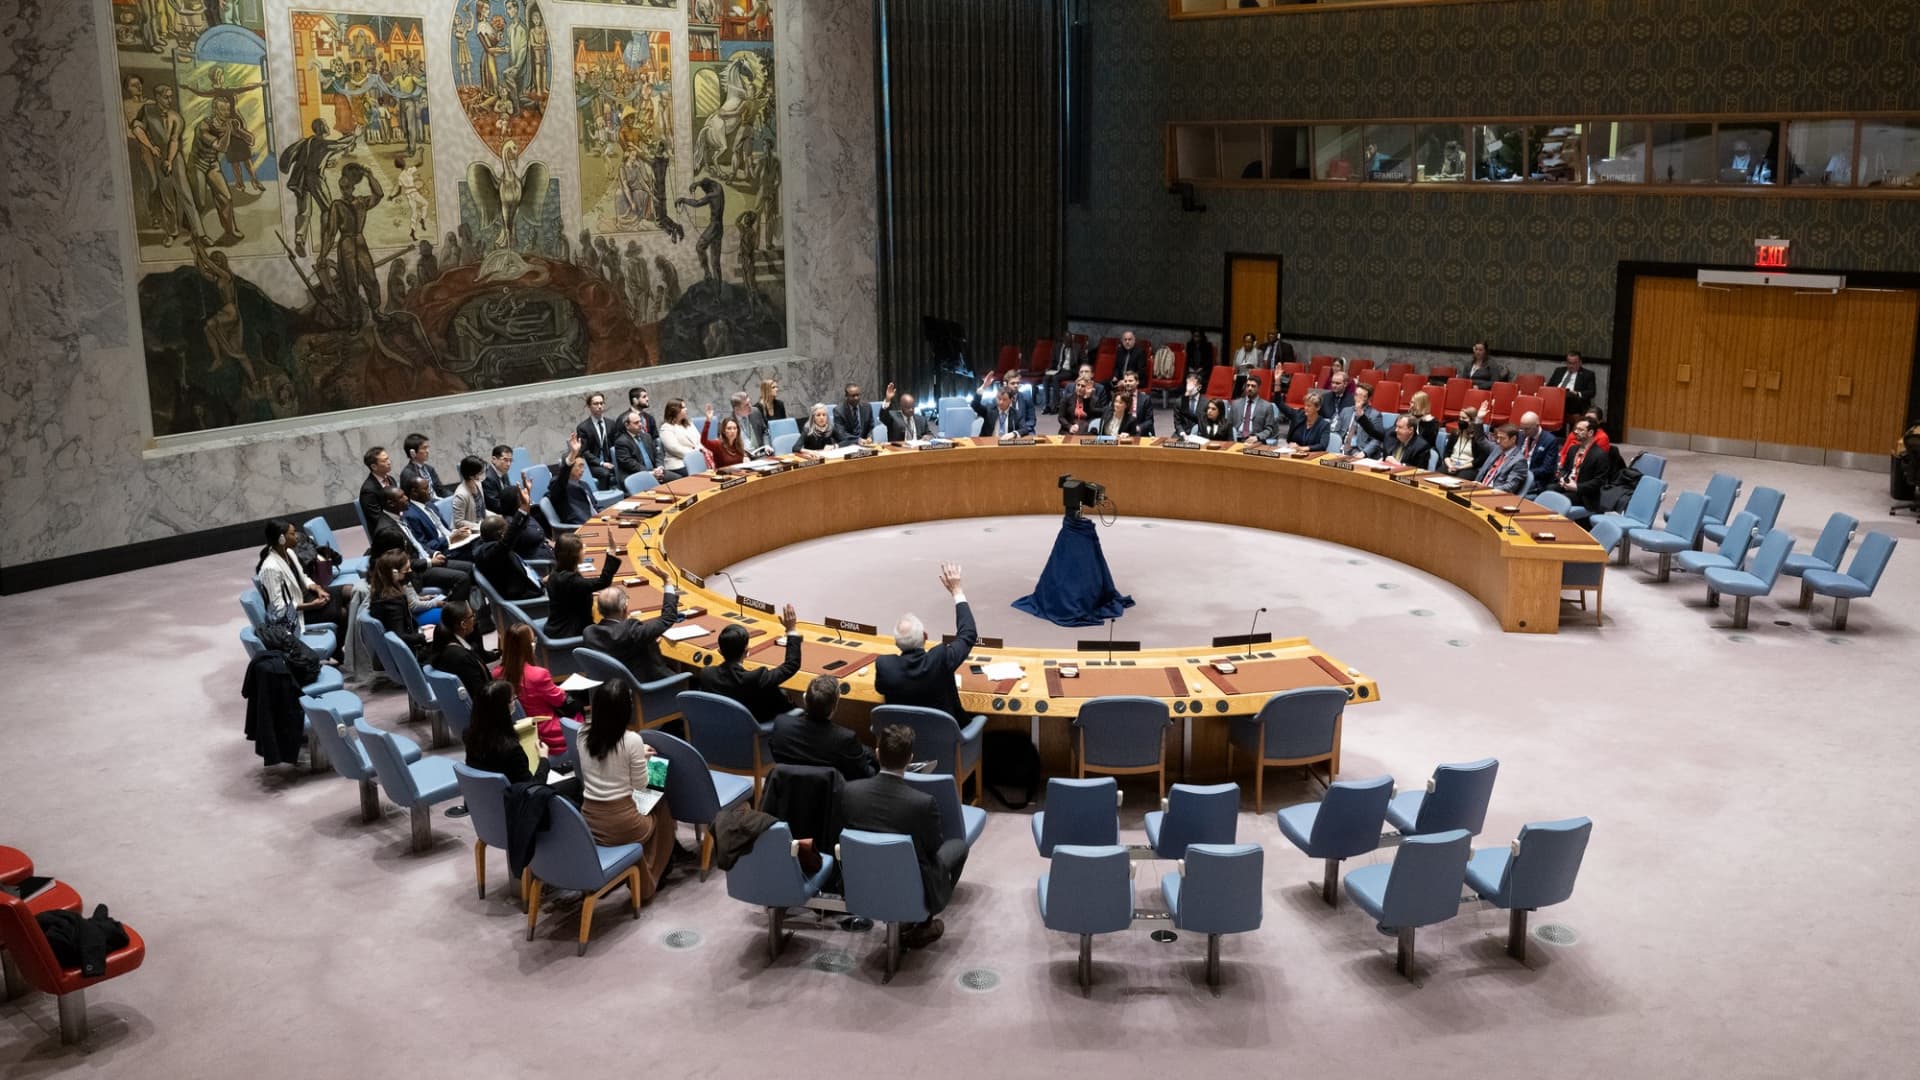 Representatives vote during a UN Security Council meeting at the UN headquarters in New York, on Feb. 15, 2023. The UN Security Council adopted a resolution on Wednesday to renew Yemen sanctions measures of asset freeze and travel ban until Nov. 15, 2023.